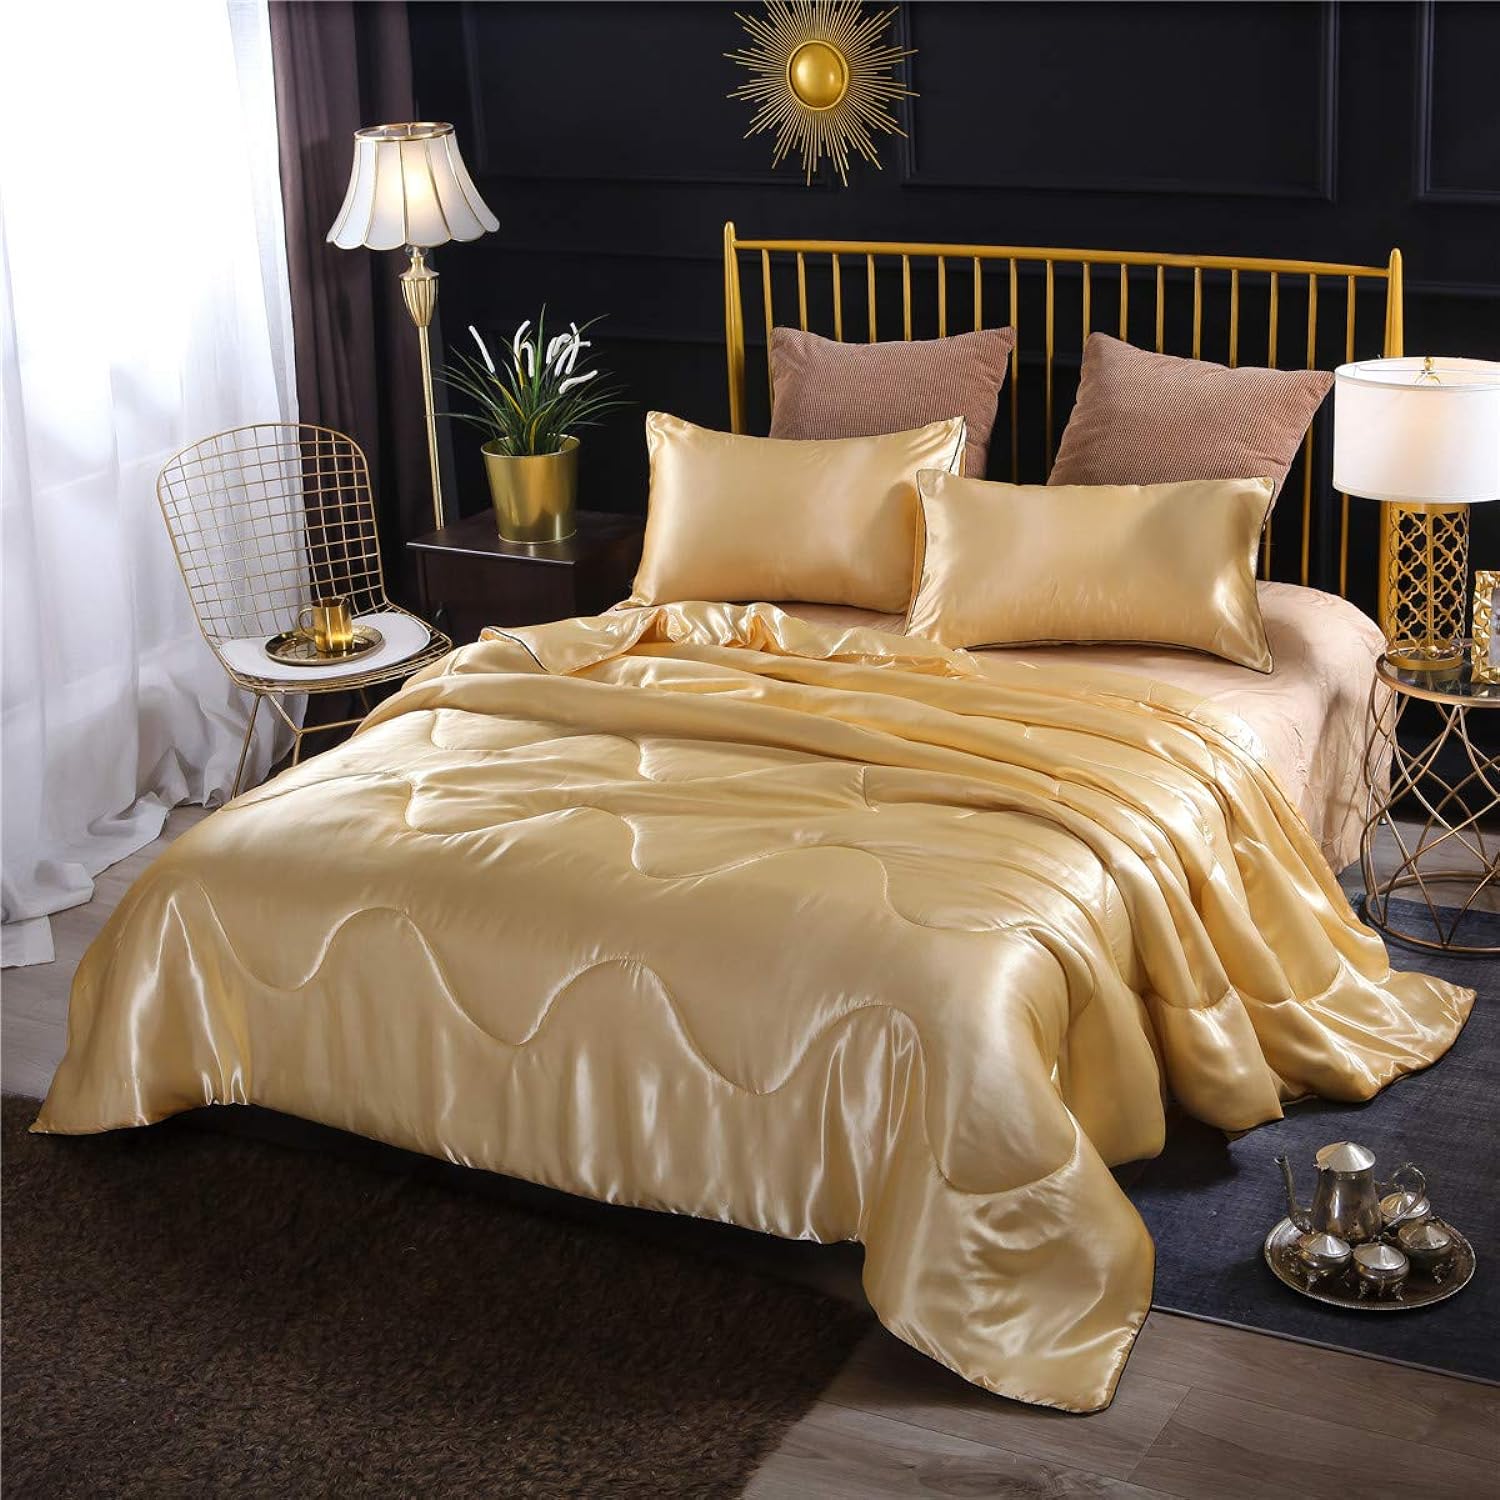 Great Choice Products Sexy Silky Satin Comforter Sets Queen Golden Lightweight Soft Luxury Quilt 3-Pieces Microfiber Bedding Set Yellow (Gold,…